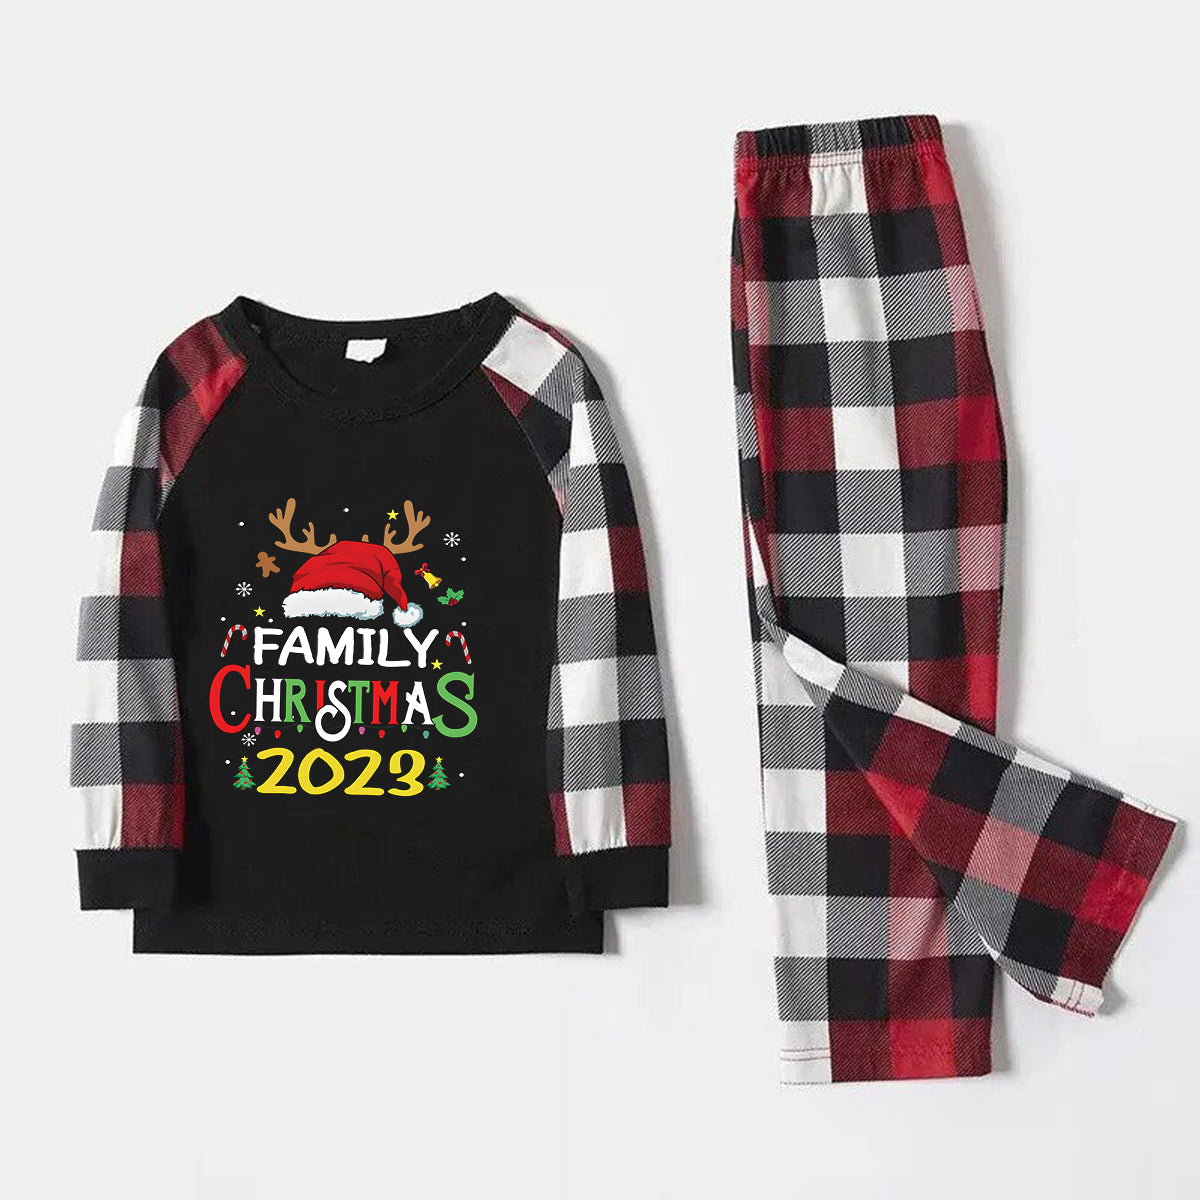 Family Christmas Shirts Santa Hat Christmas Deer Patterned and 'FAMILY CHRISTMAS 2023  ' Letter Print Contrast Tops and Red & Black & White Plaid Pants Family Matching Pajamas Set With Dog Bandana